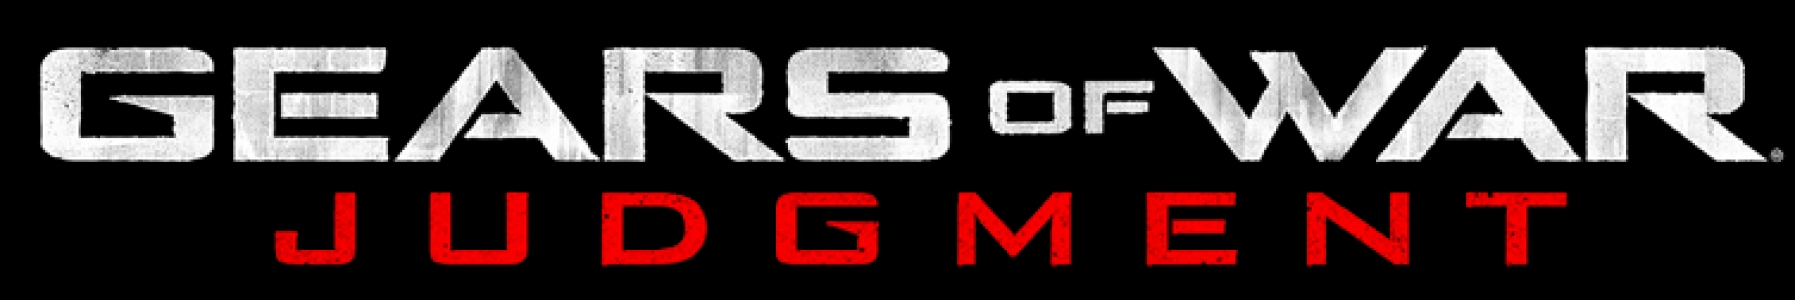 Gears of War: Judgment clearlogo